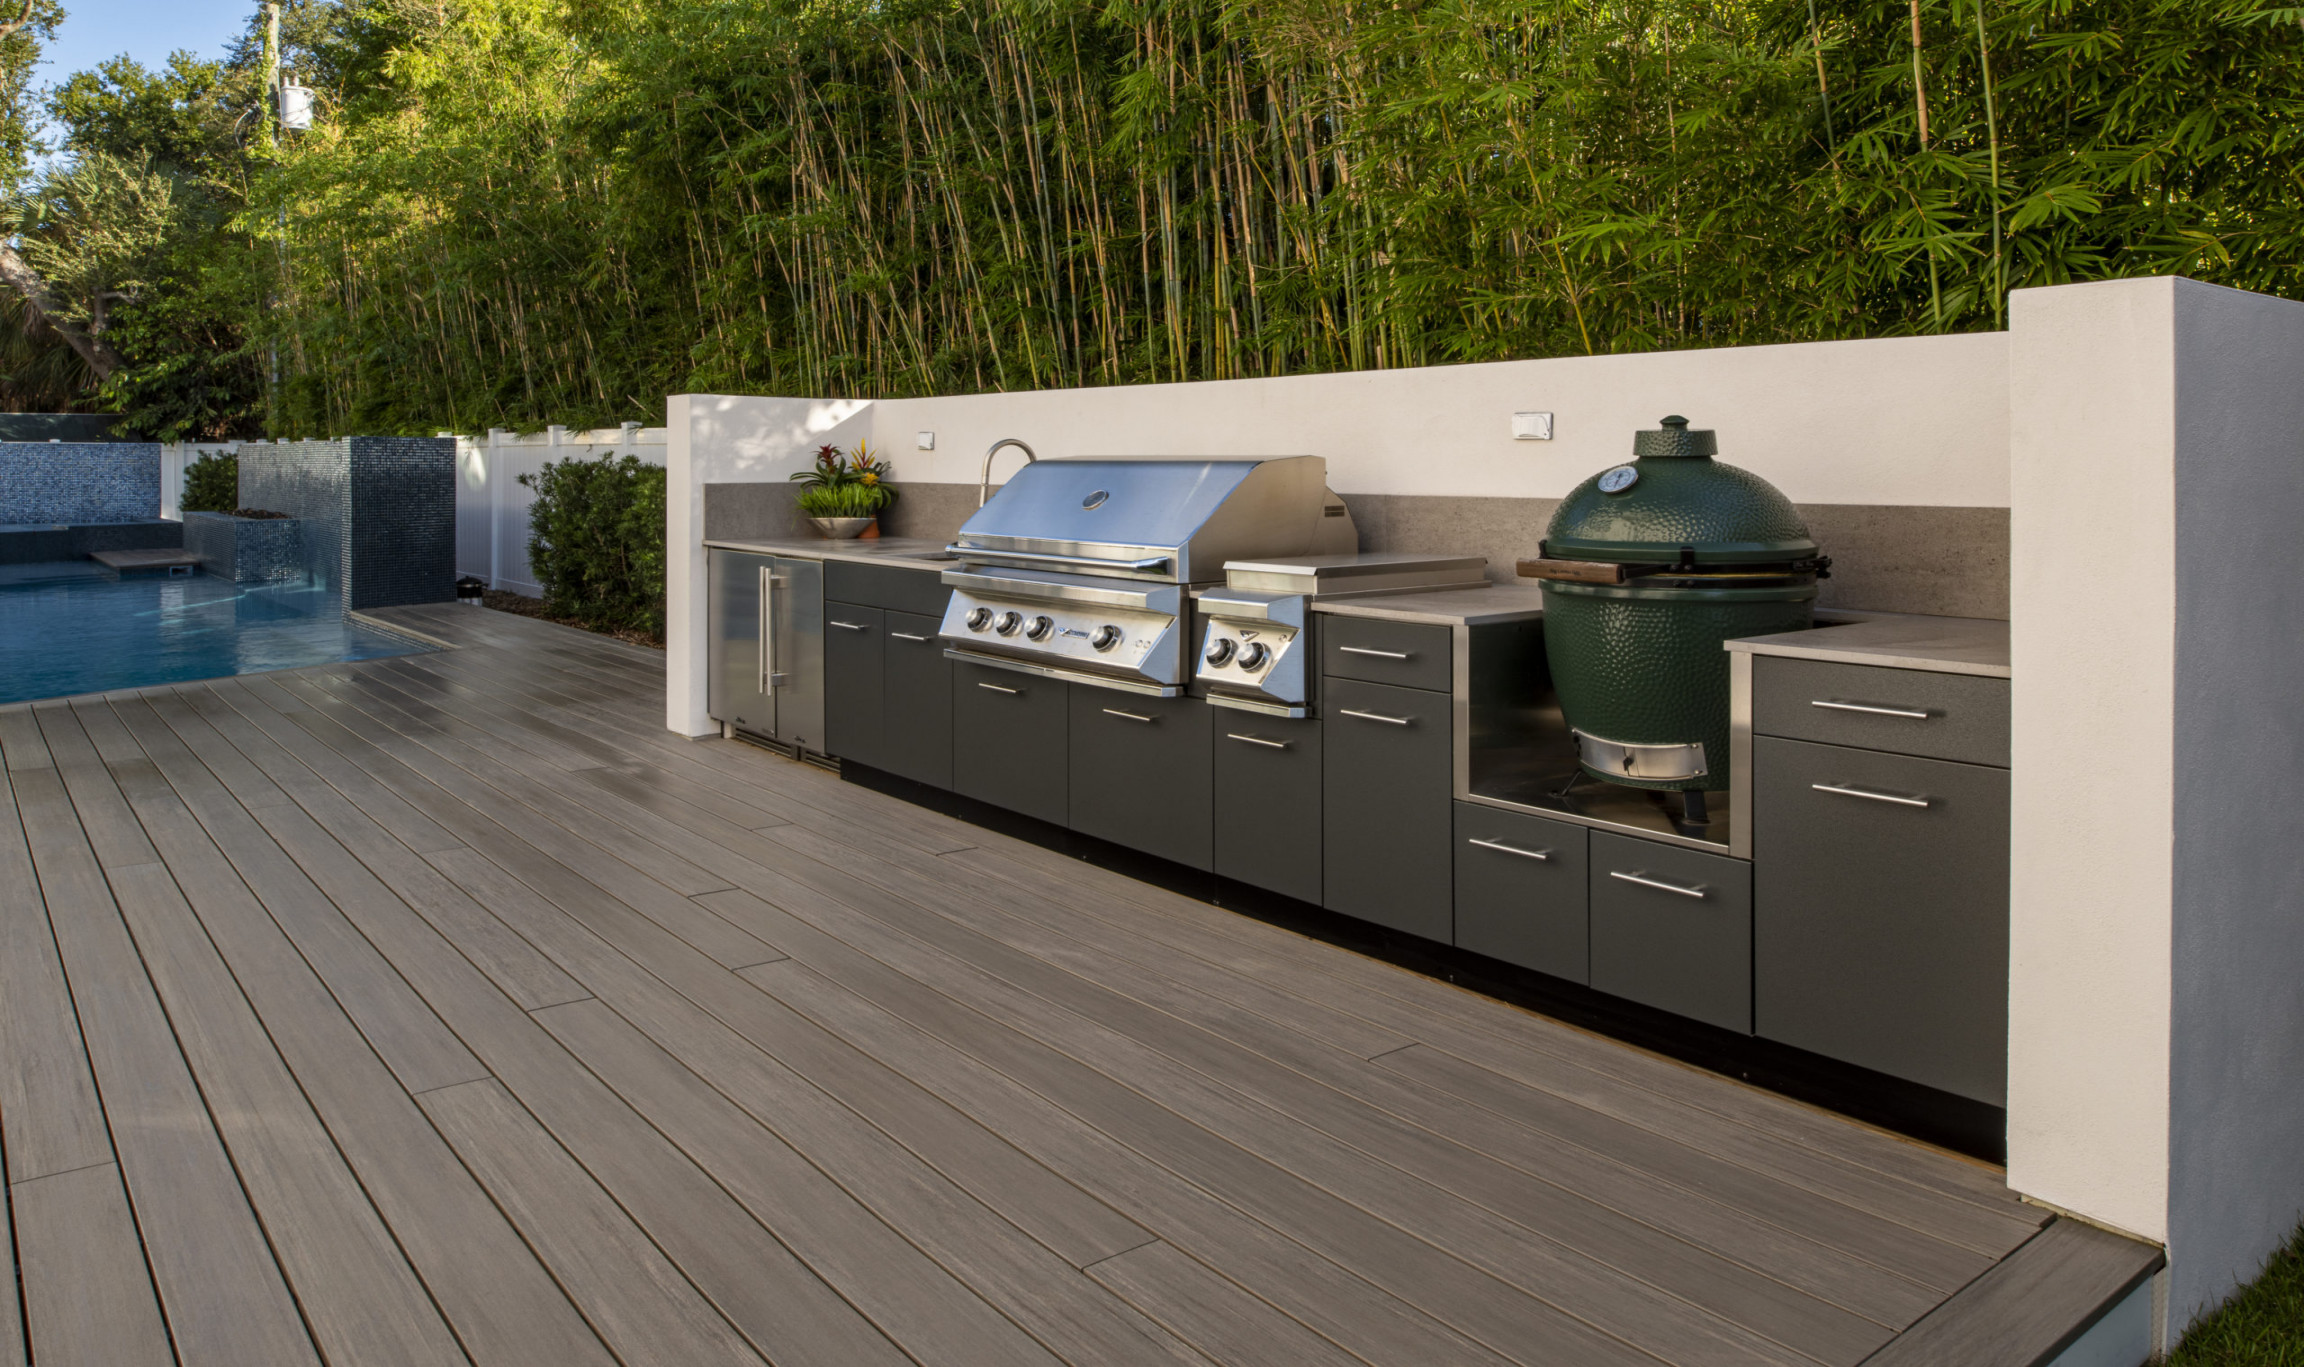 Outdoor Kitchen on a Deck: Things to Consider & Ideas